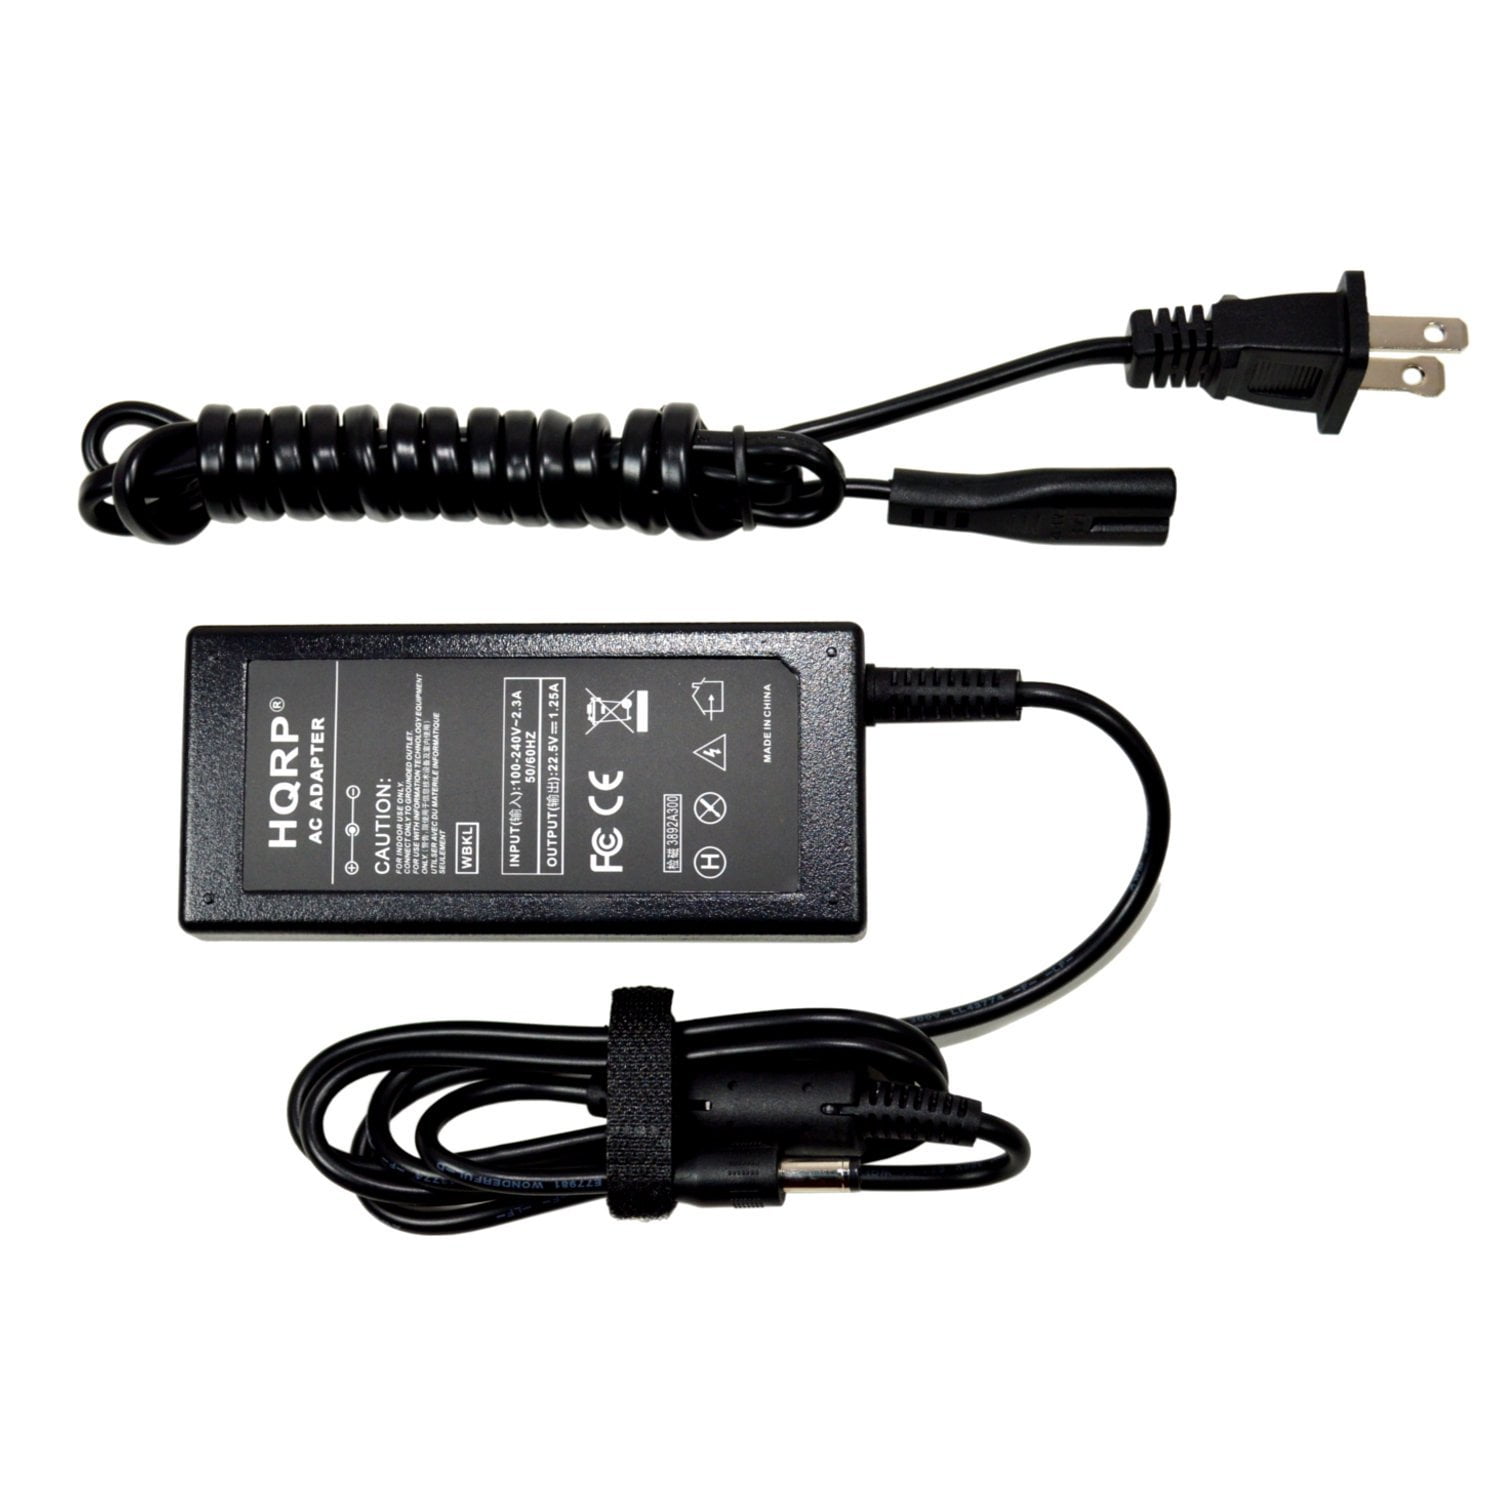 AC Power Supply Adapter Battery Charger Plug for iRobot Roomba Vacuum Cleaner 